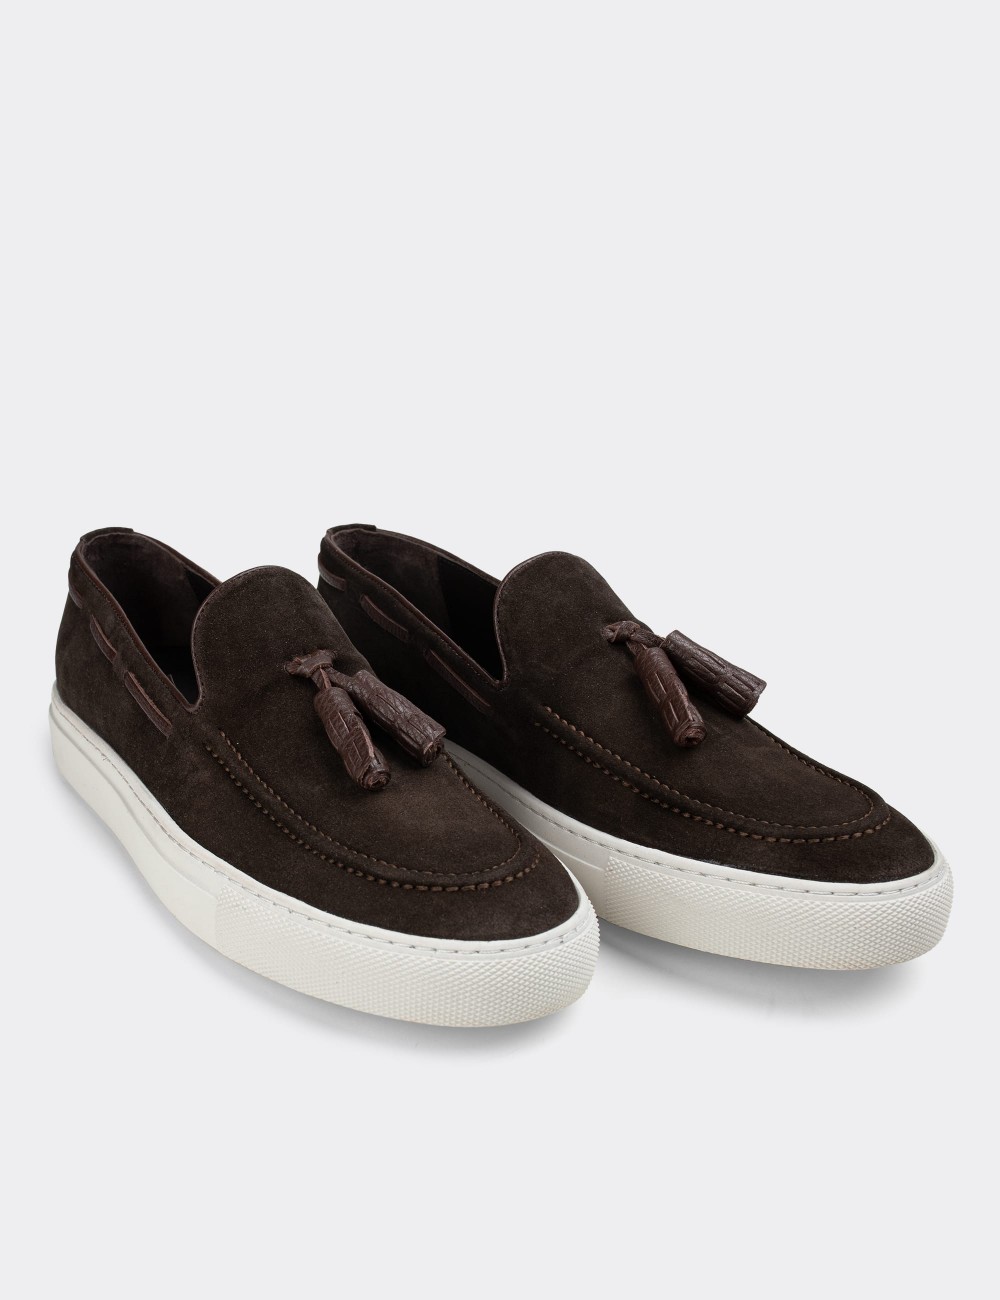 Brown Suede Leather Sneakers - 01836MKHVC01